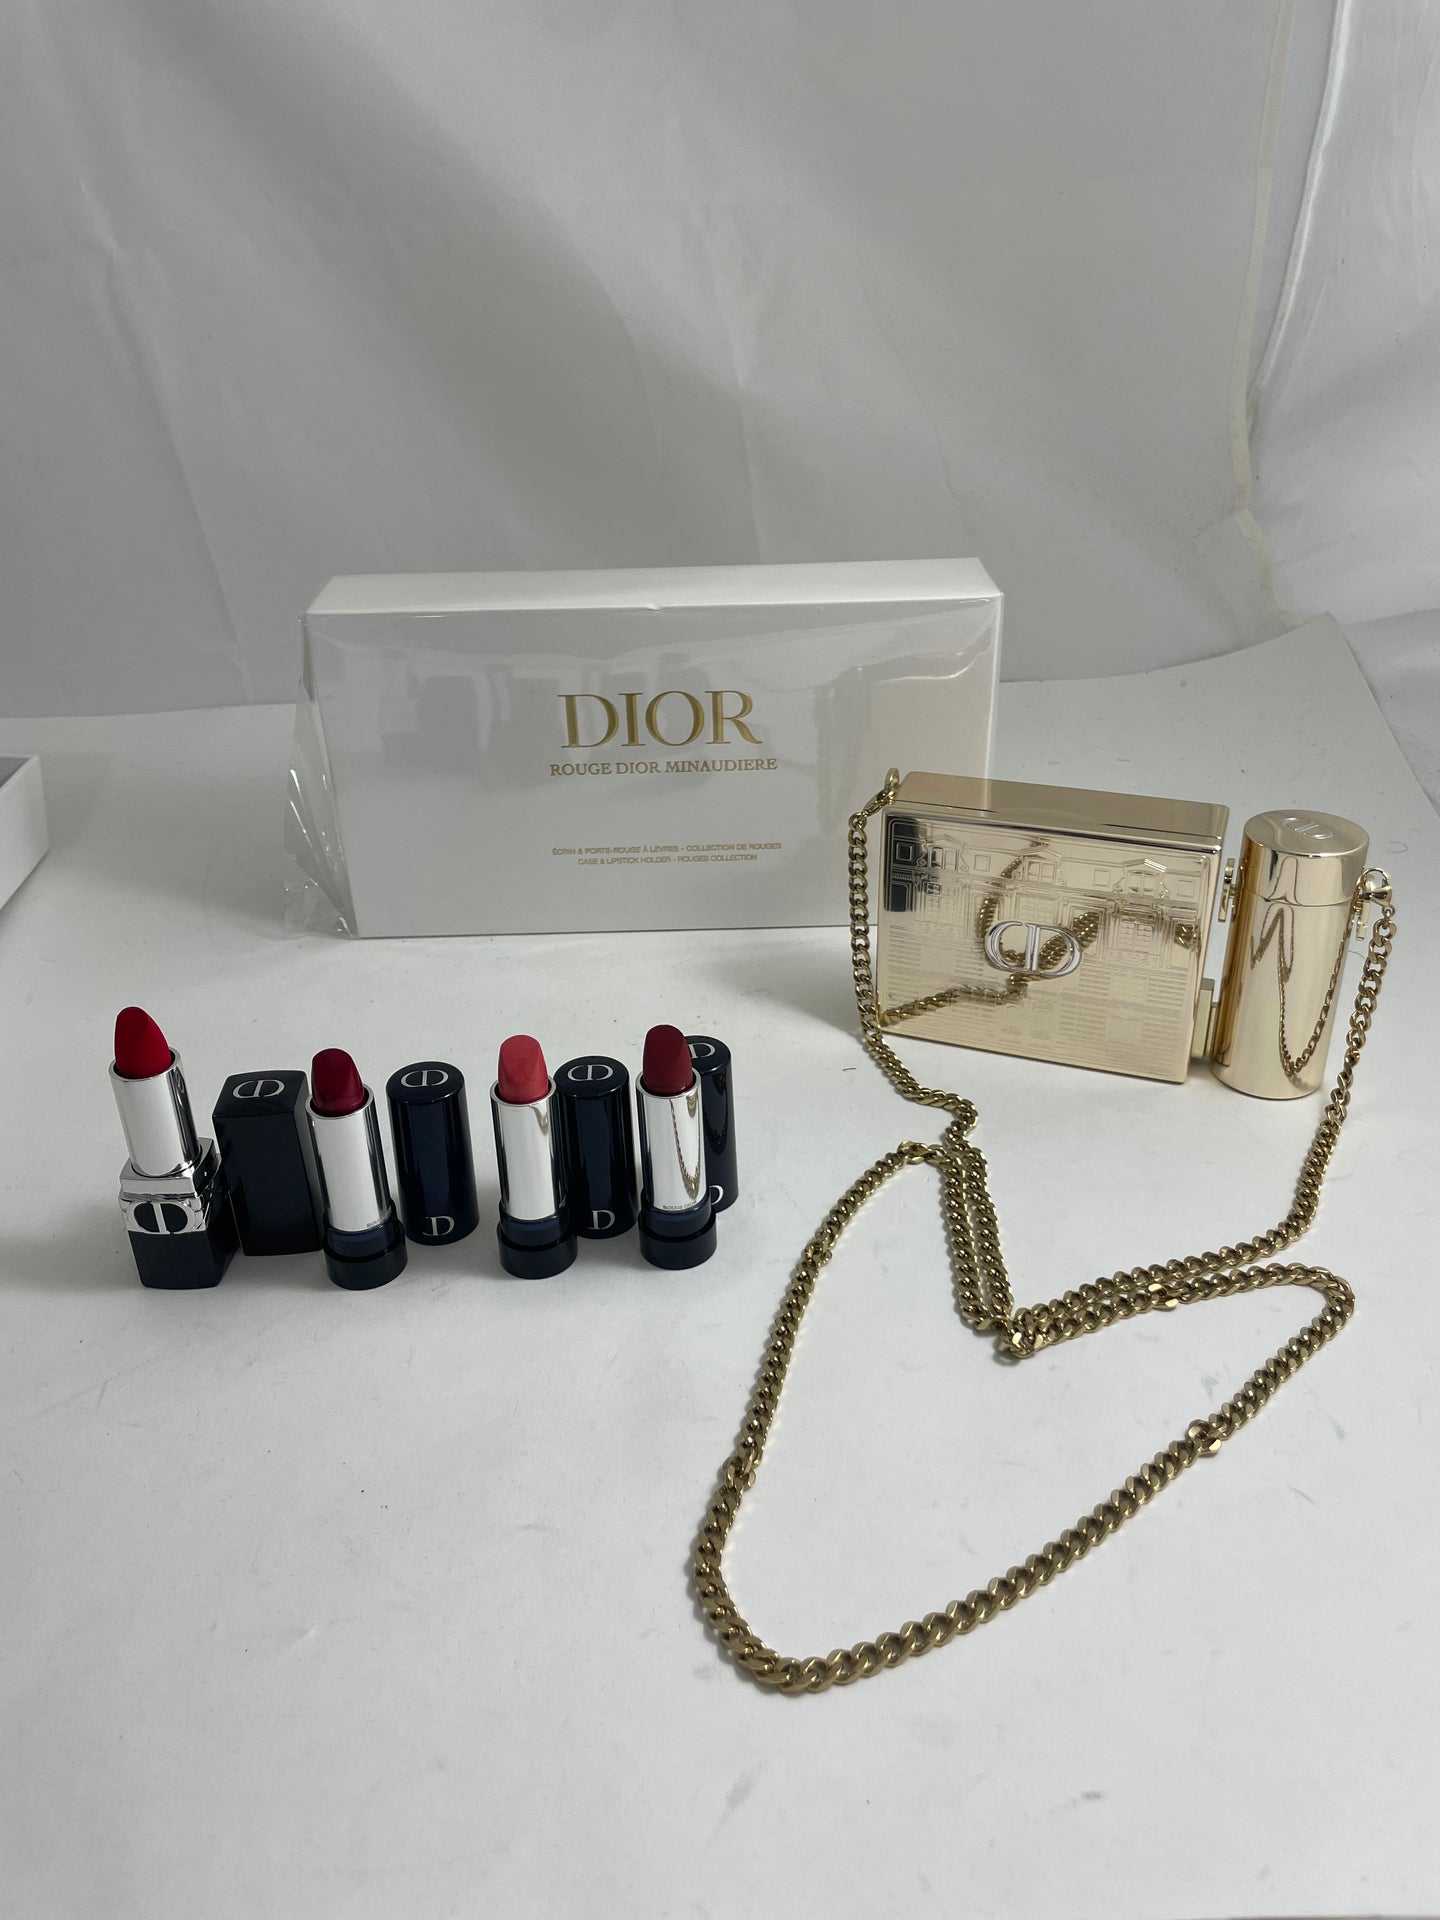 Dior Rouge Dior Minaudiere Gift Set-Limited Edition